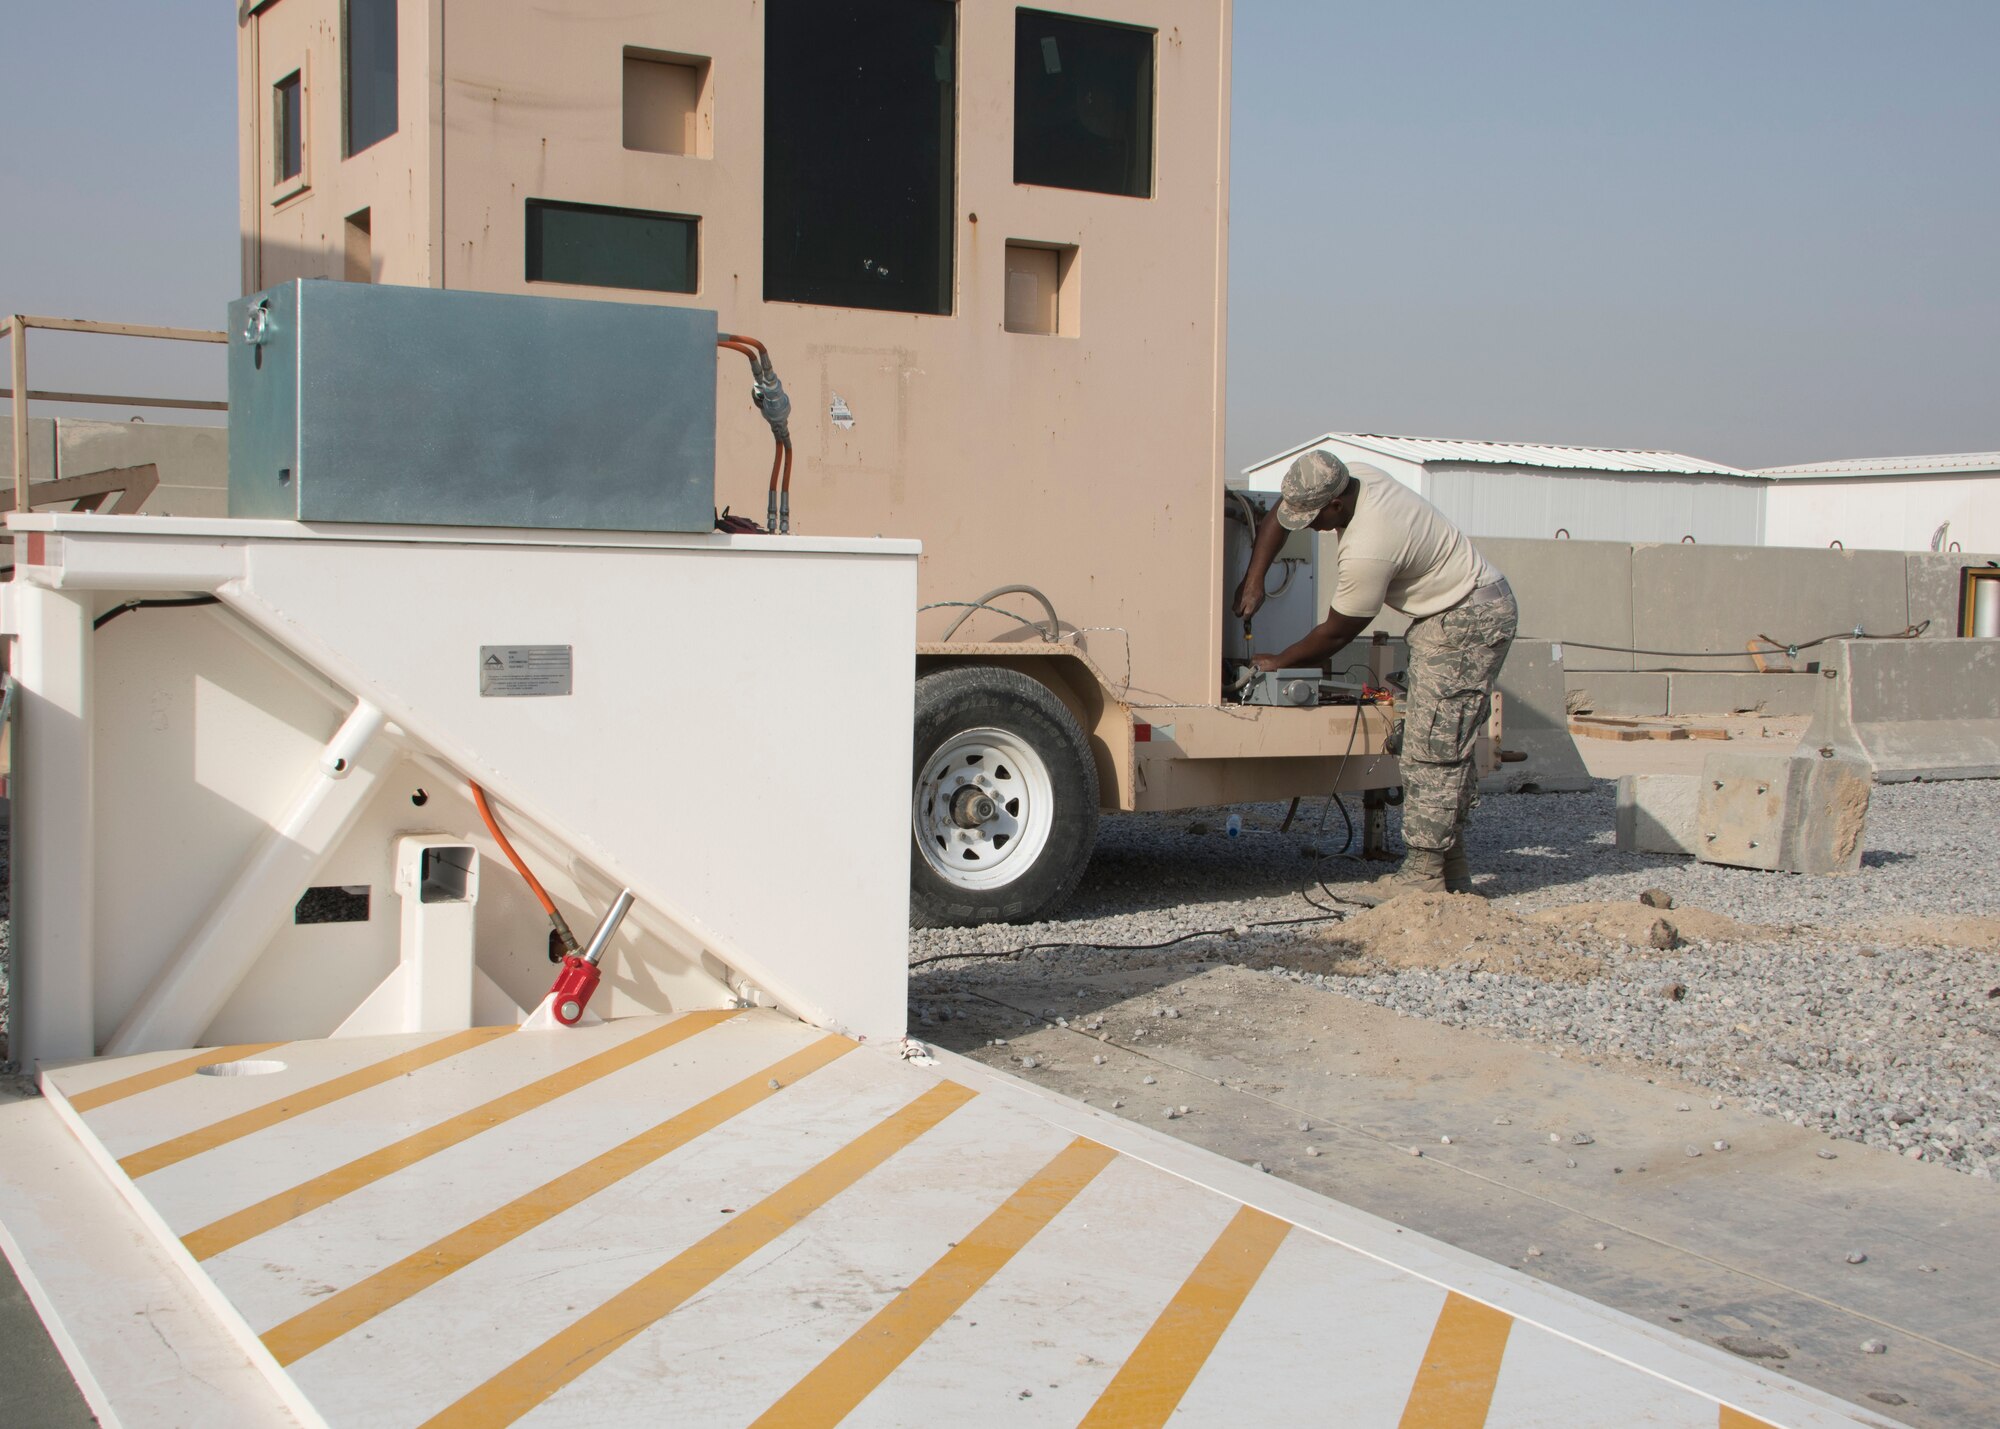 Senior Airman Doug Sampson from the 387th Expeditionary Support Squadron wires power to a guard shack at a new entry control point an undisclosed location in Southwest Asia Dec. 30, 2016. In addition to wiring power to the guard shack, the 387th ESPTS was also able to install power to the barricades installed at the new ECP. (U.S. Air Force photo/Senior Airman Andrew Park)